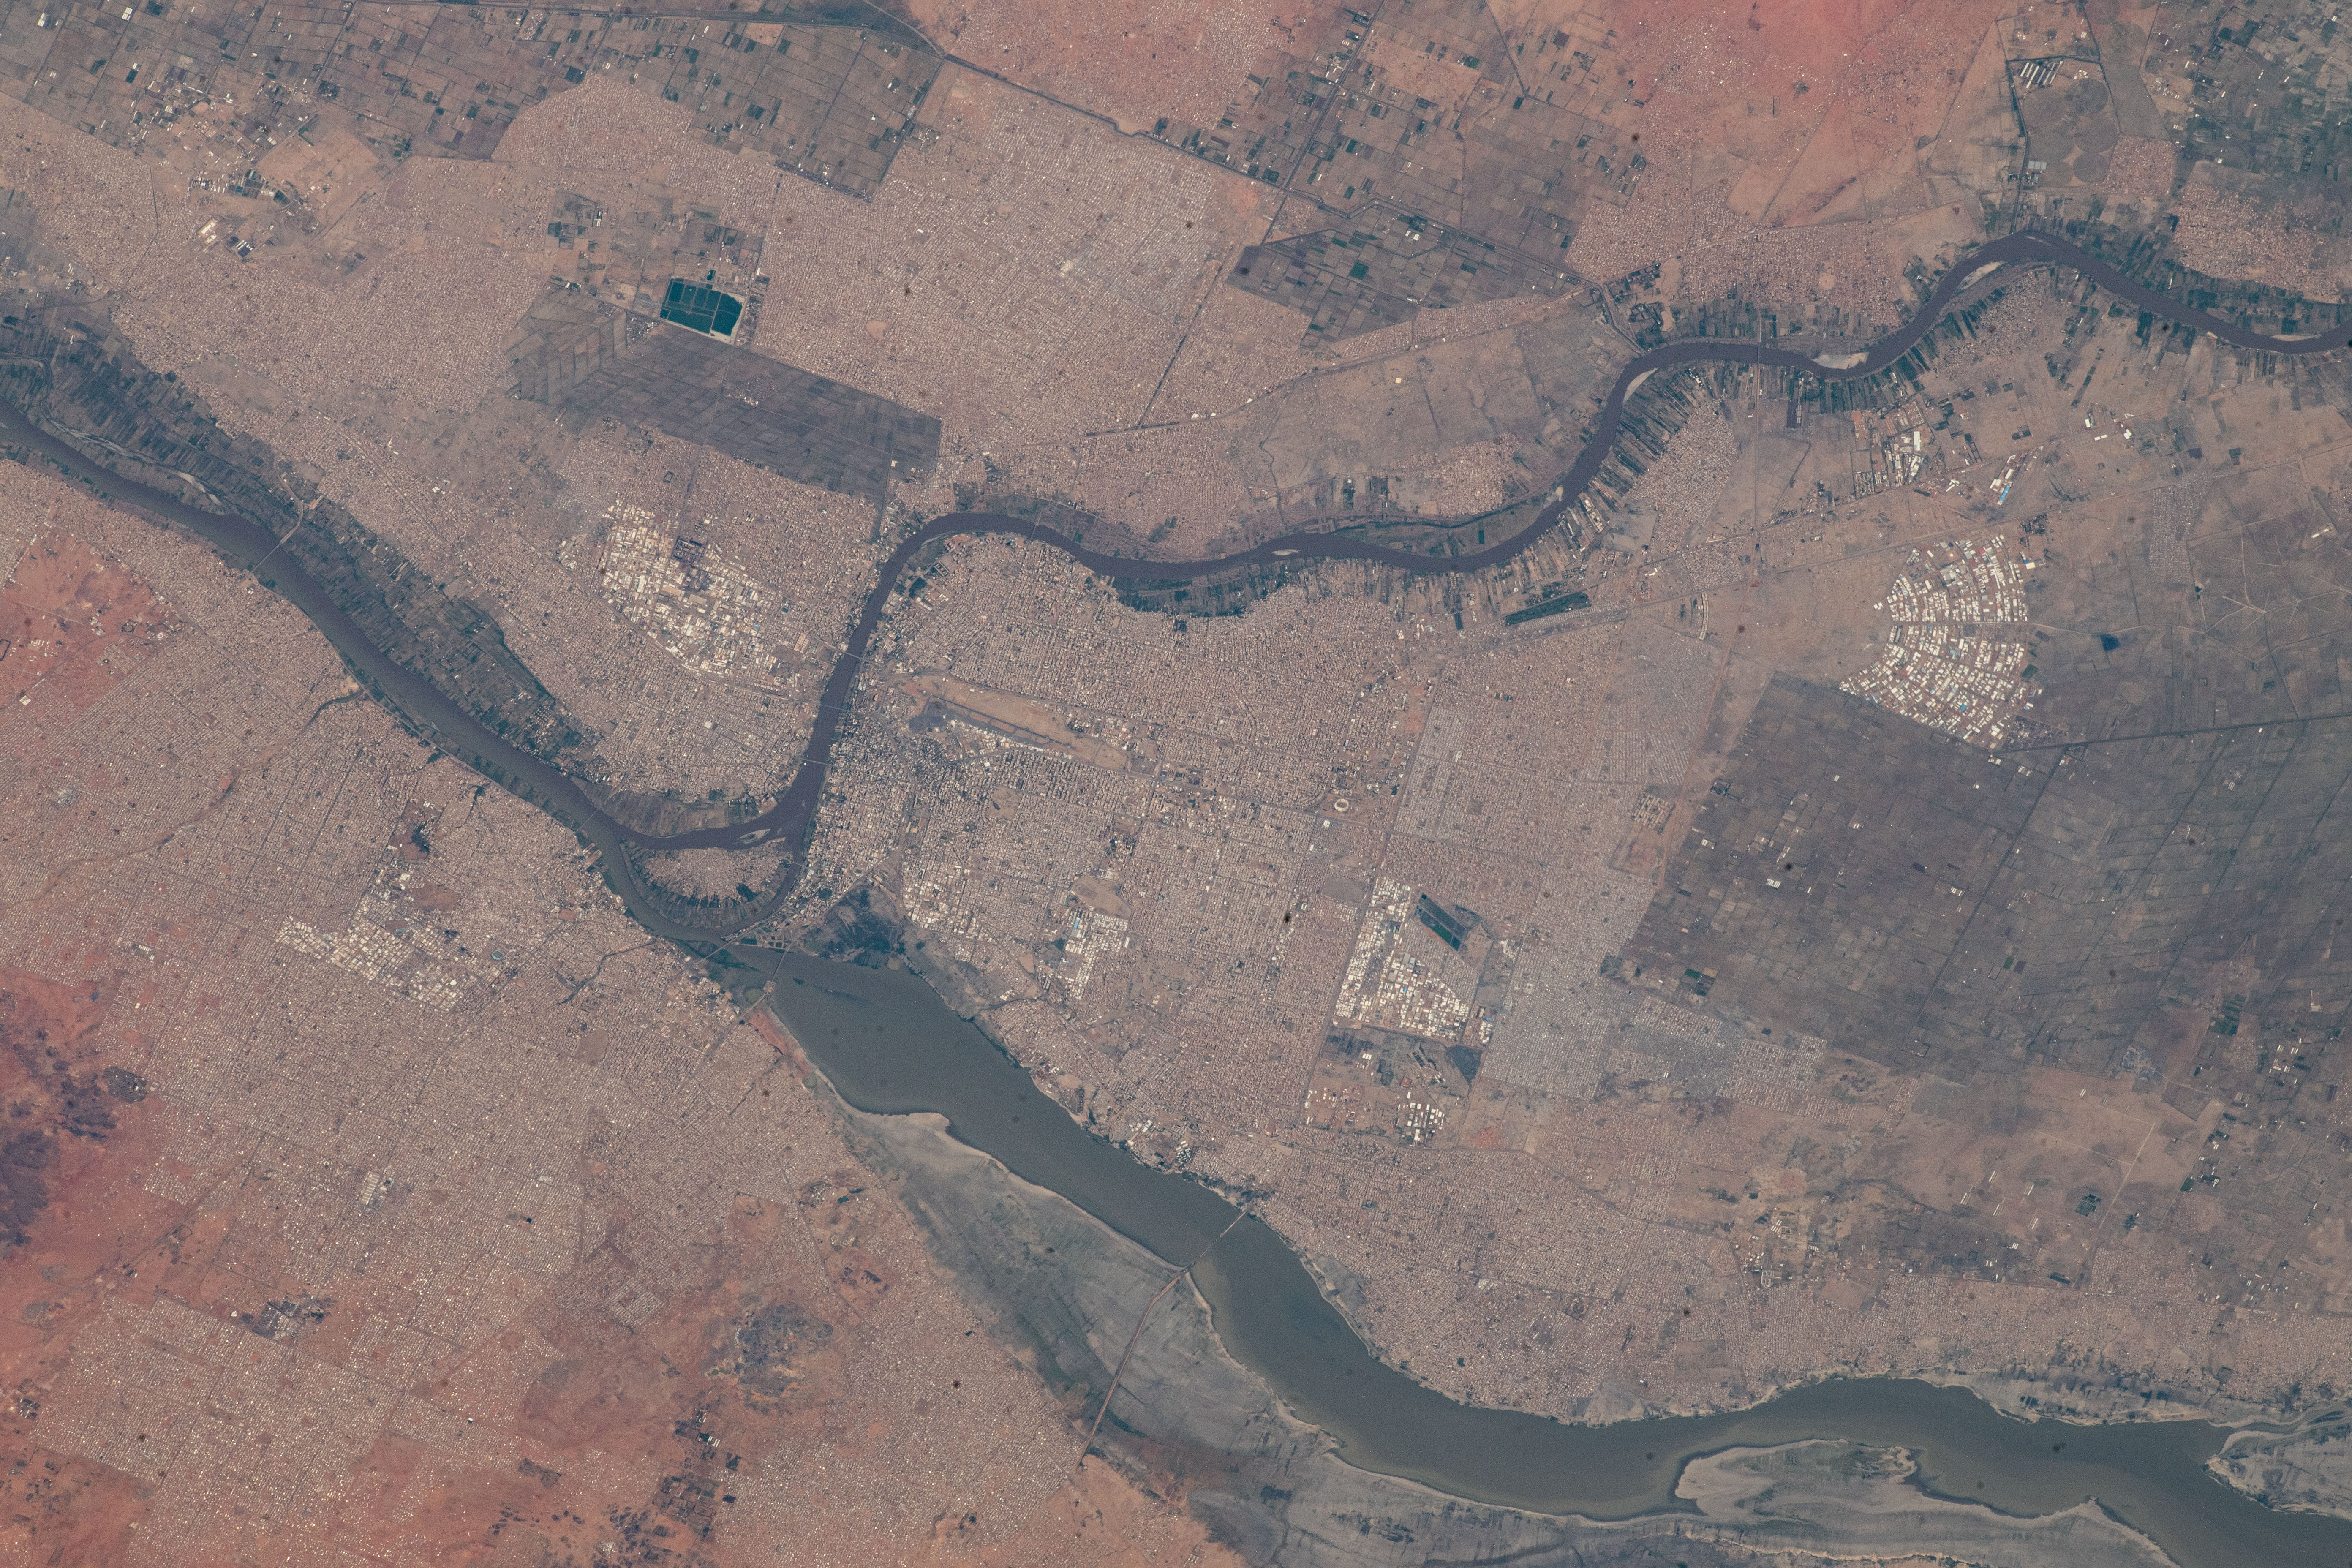 The cities of Khartoum and Omdurman in Sudan are pictured from the International Space Station as it orbited 258 miles above the African nation.